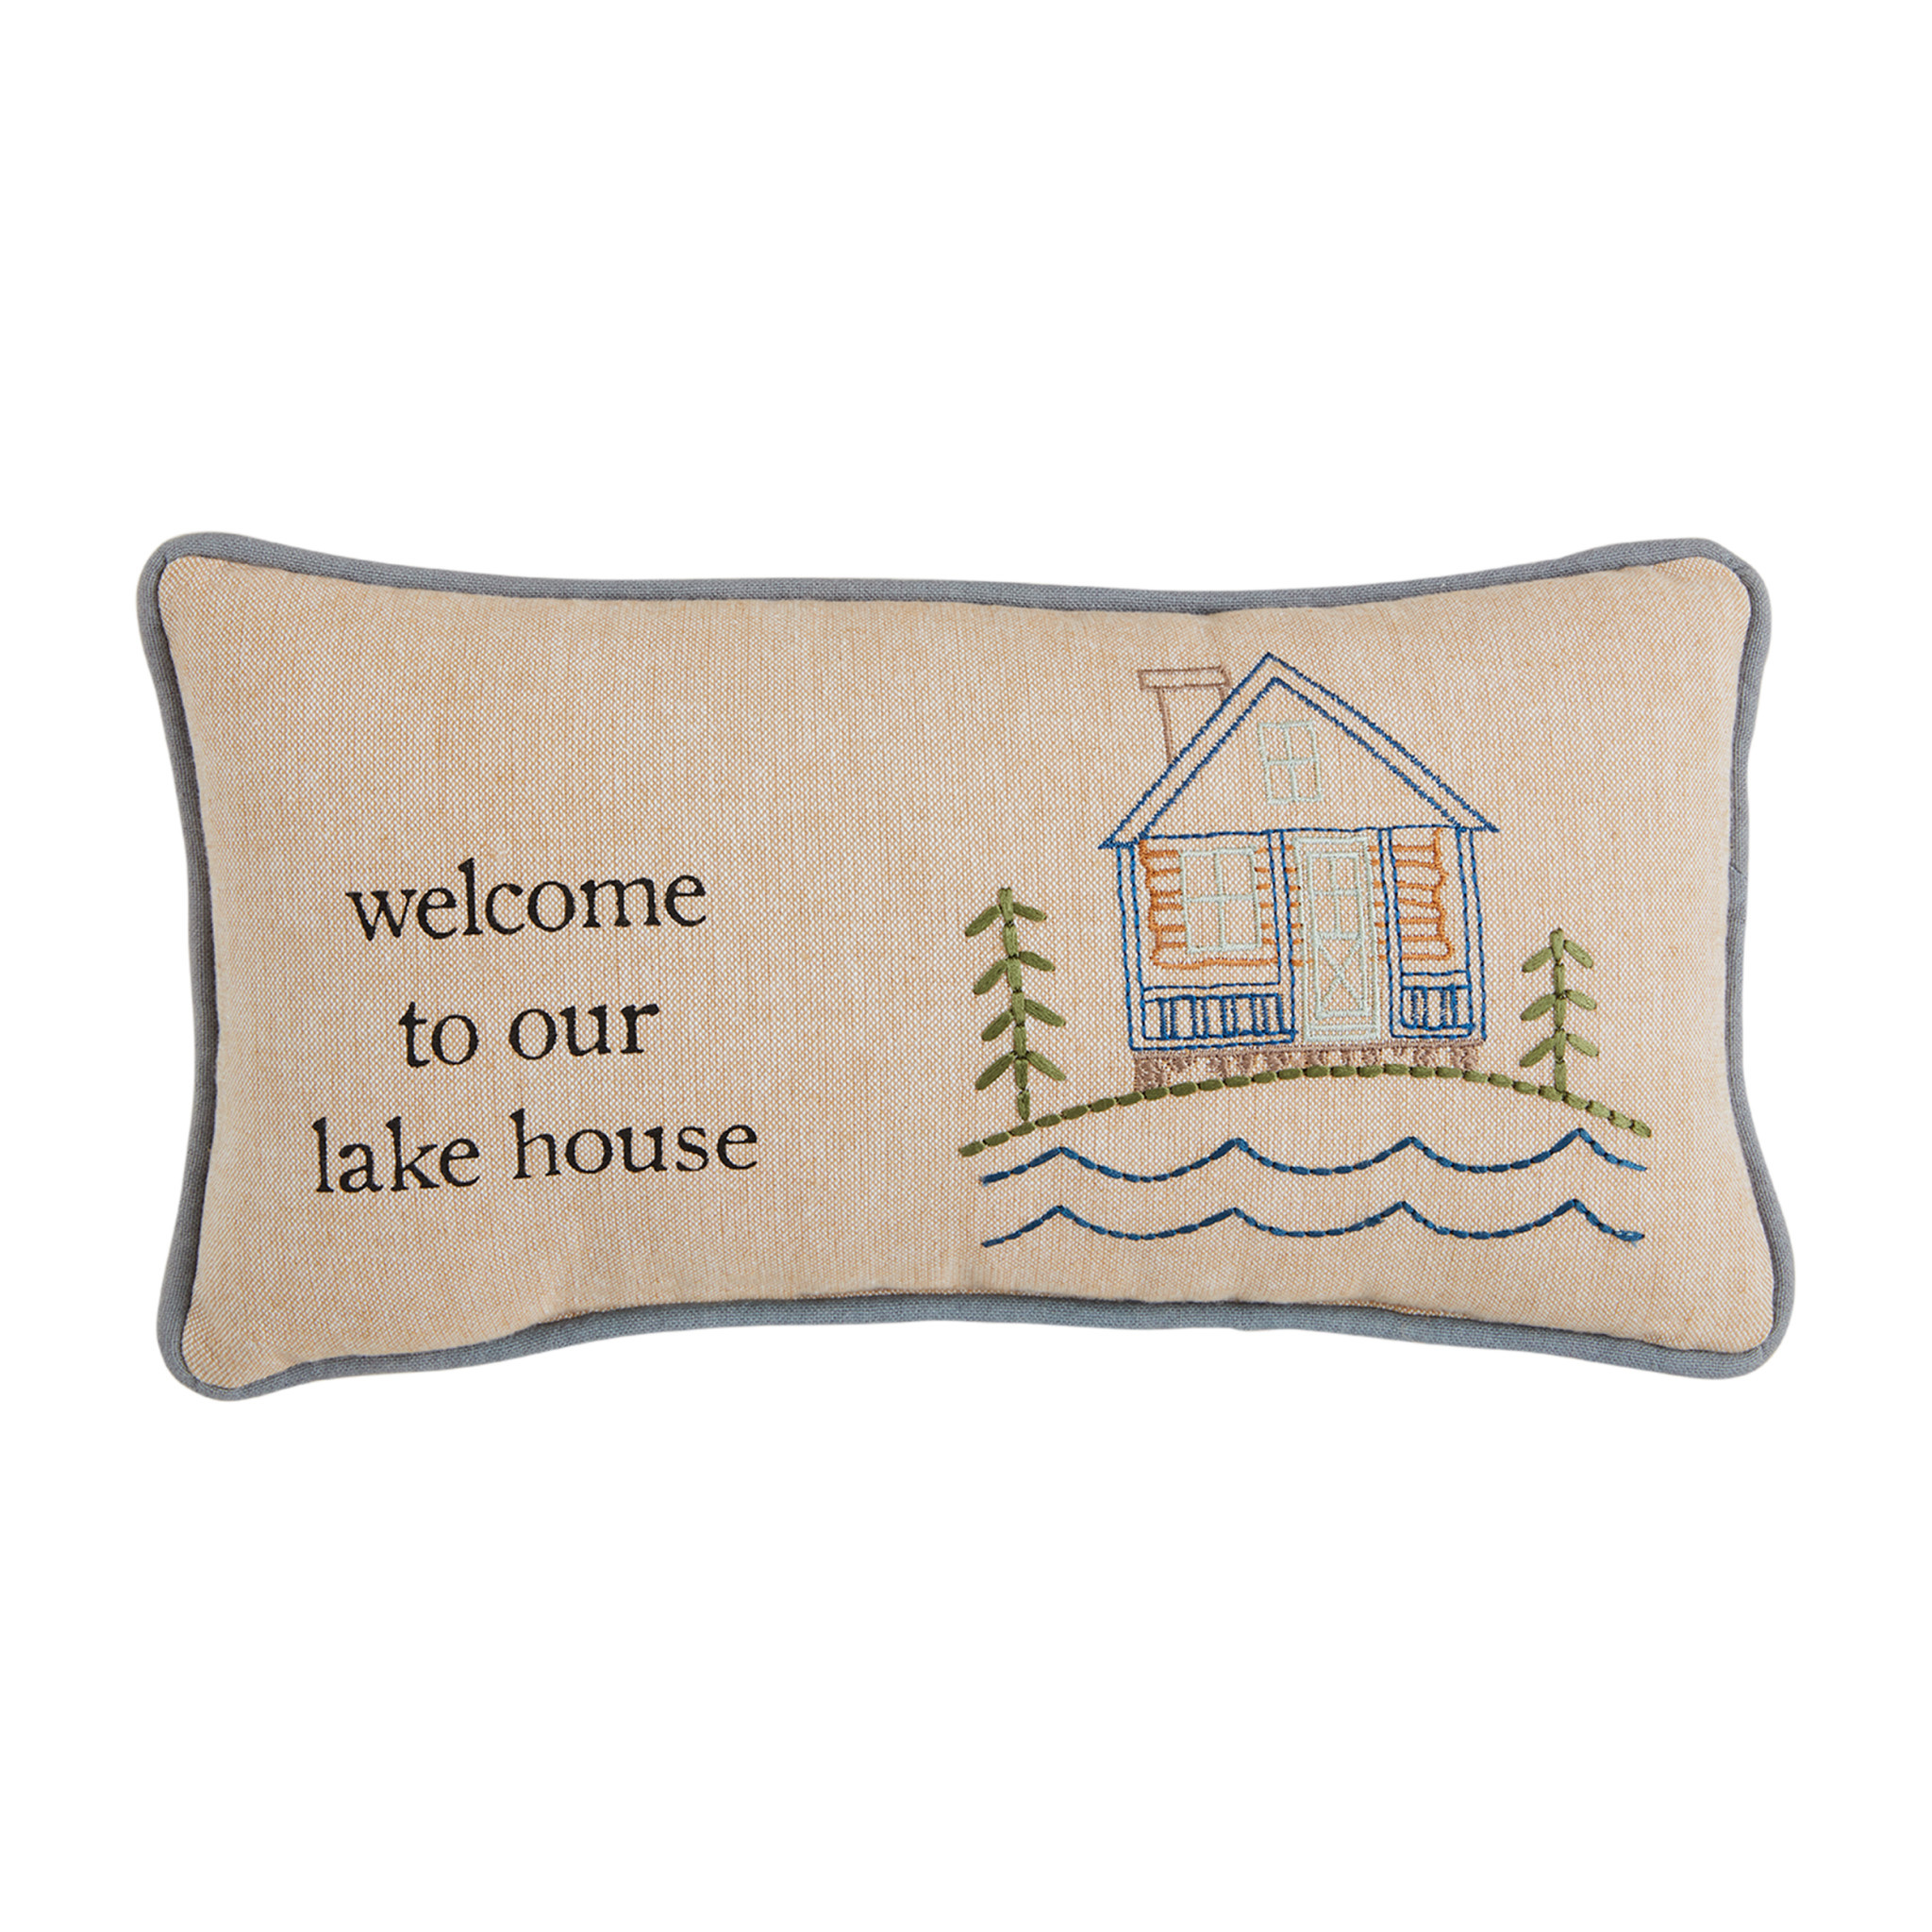 Mudpie WELCOME EMBROIDERED PILLOWS